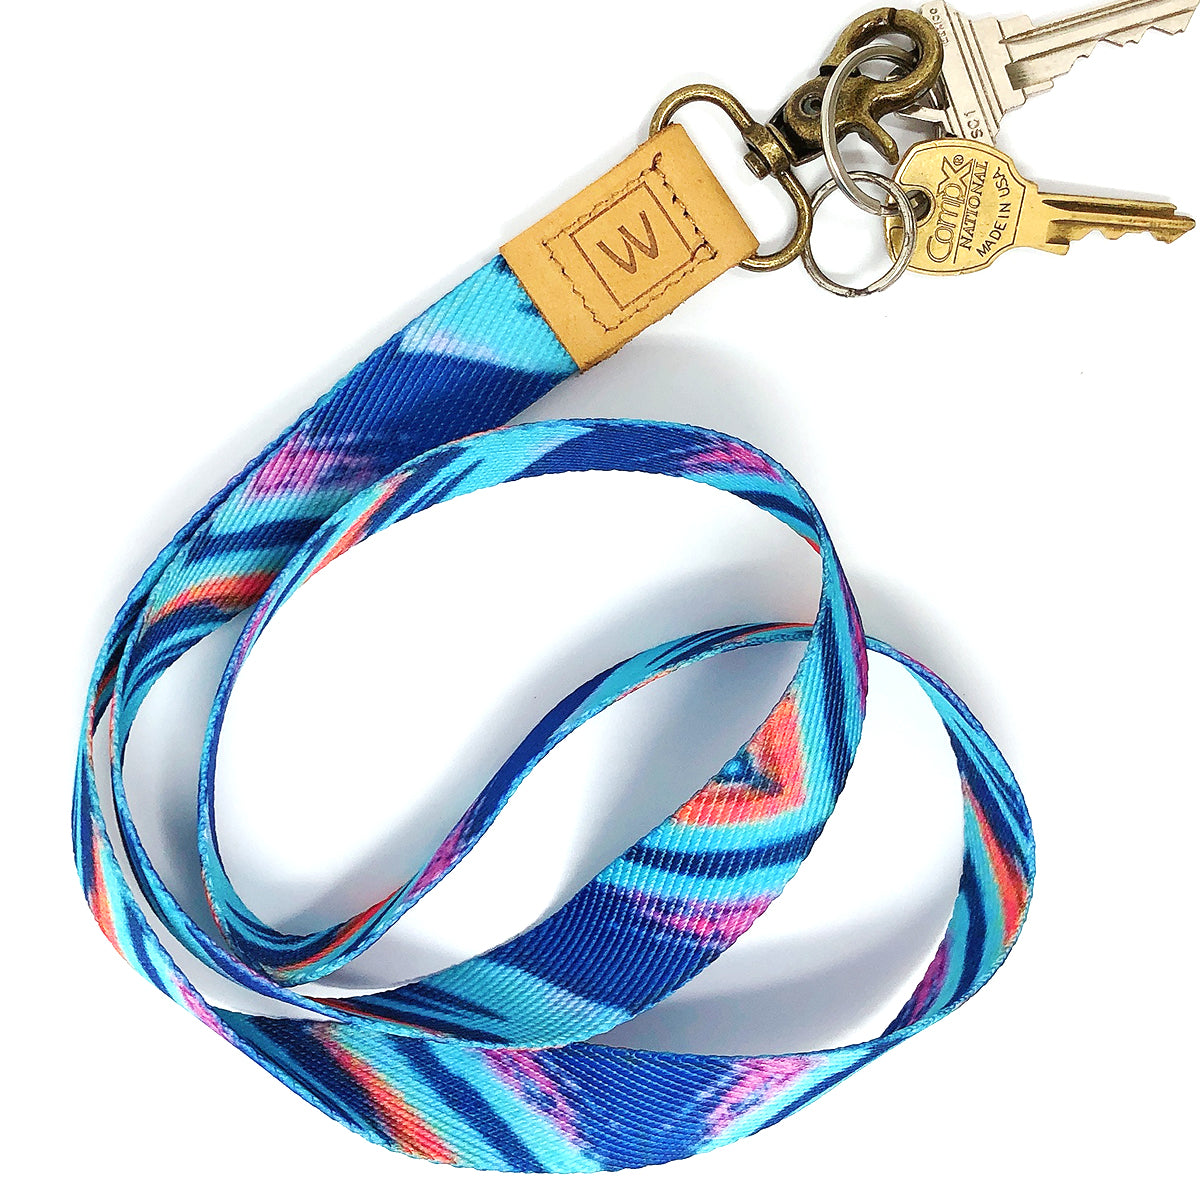 Wrapables Lanyard Keychain and ID Badge Holder, Galaxy Blue